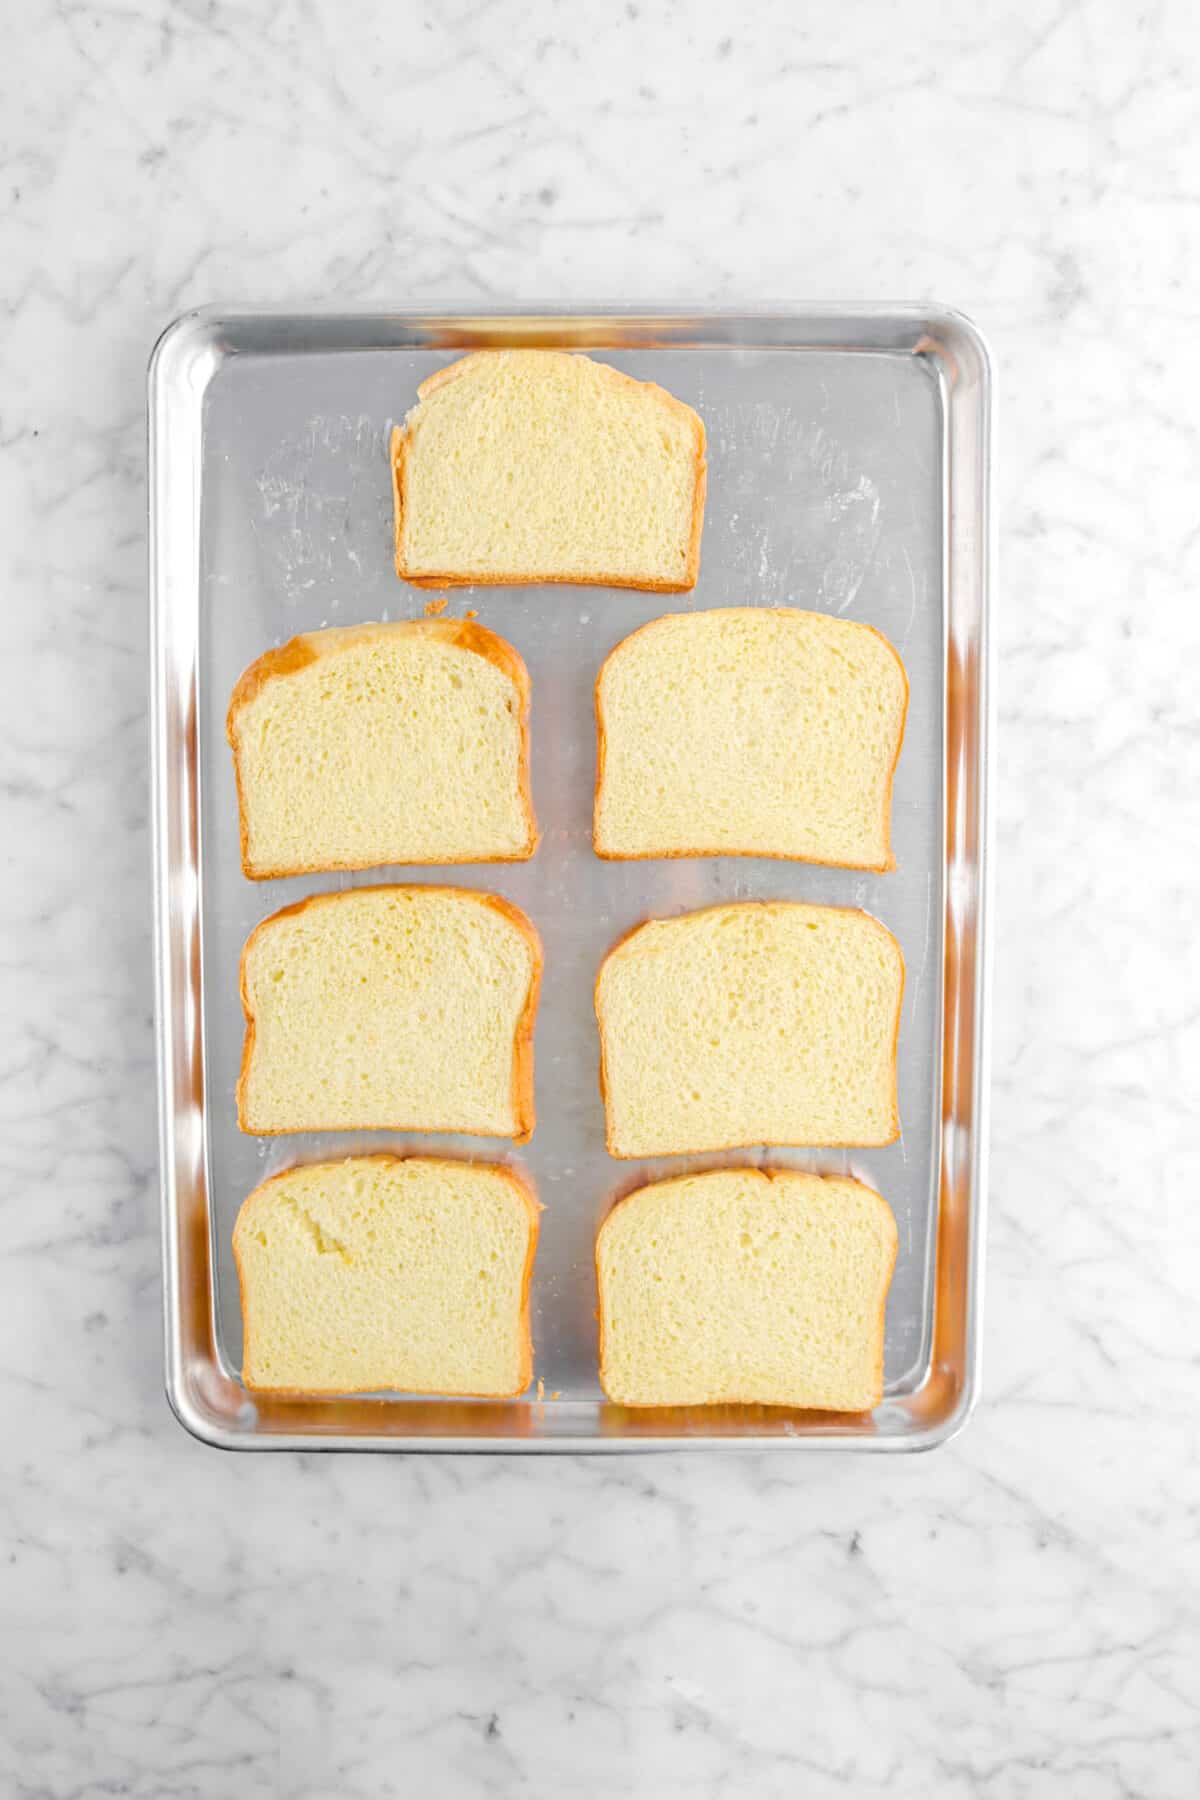 seven pieces of brioche on sheet pan